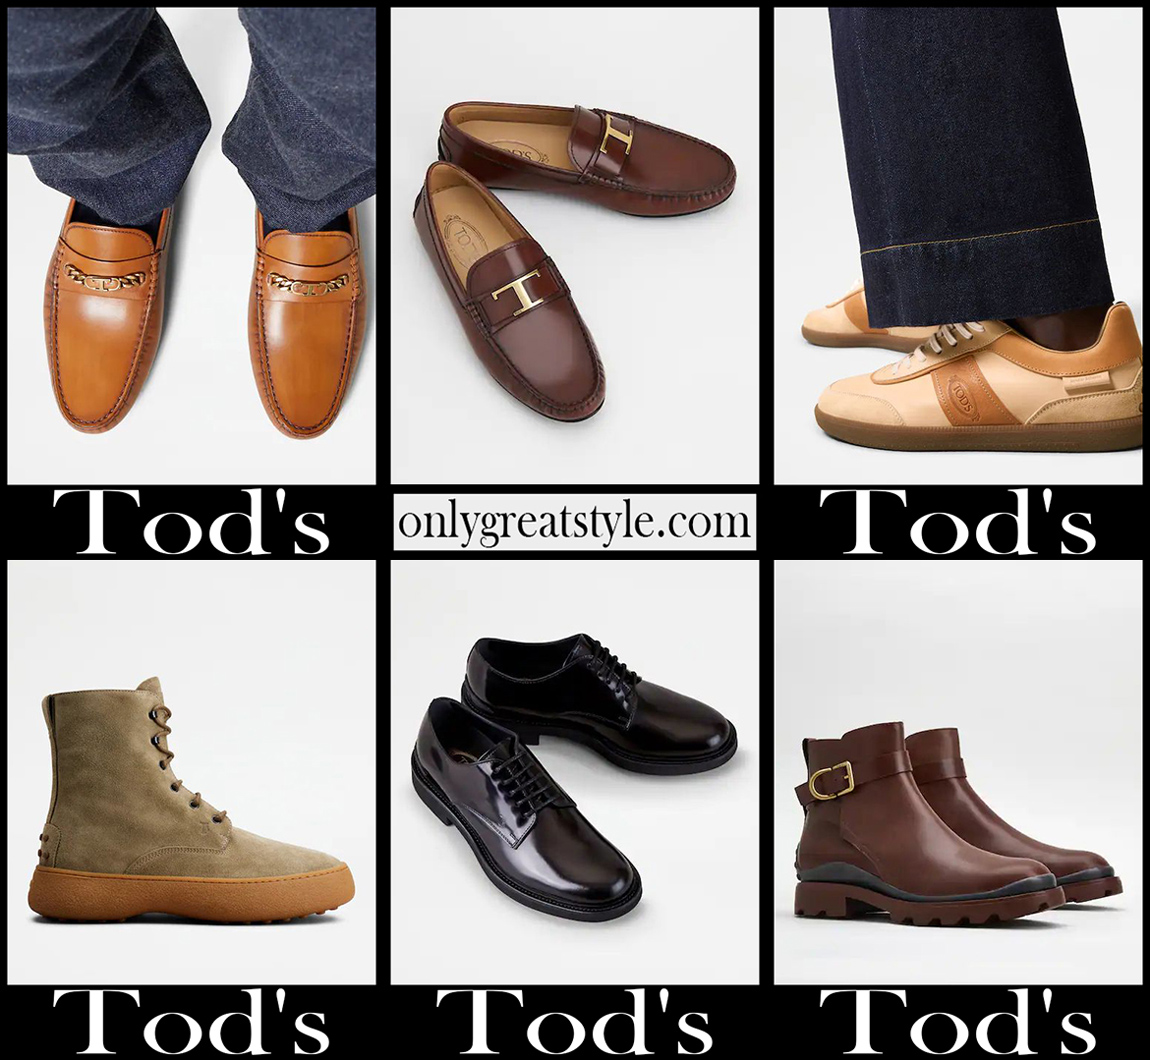 Tods shoes 2022 new arrivals mens footwear